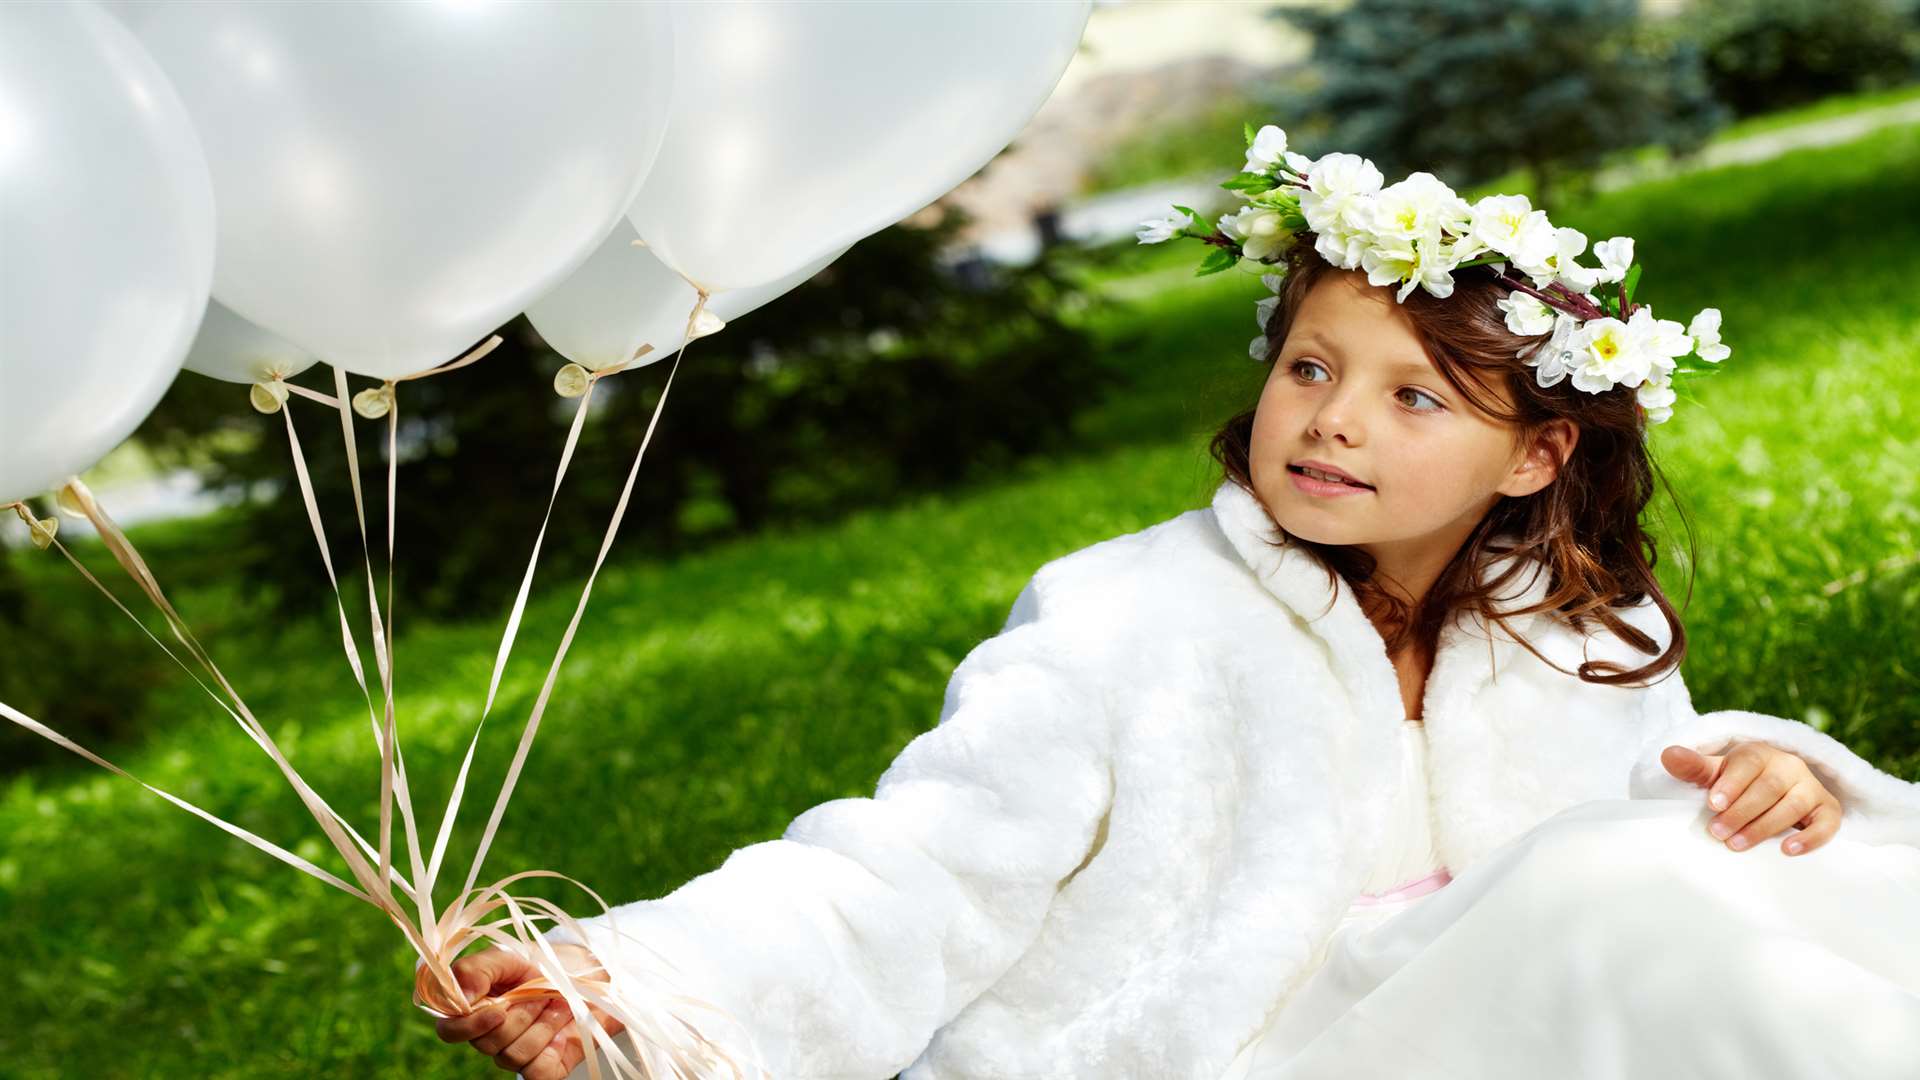 Balloons at a wedding can help distract younger guests!